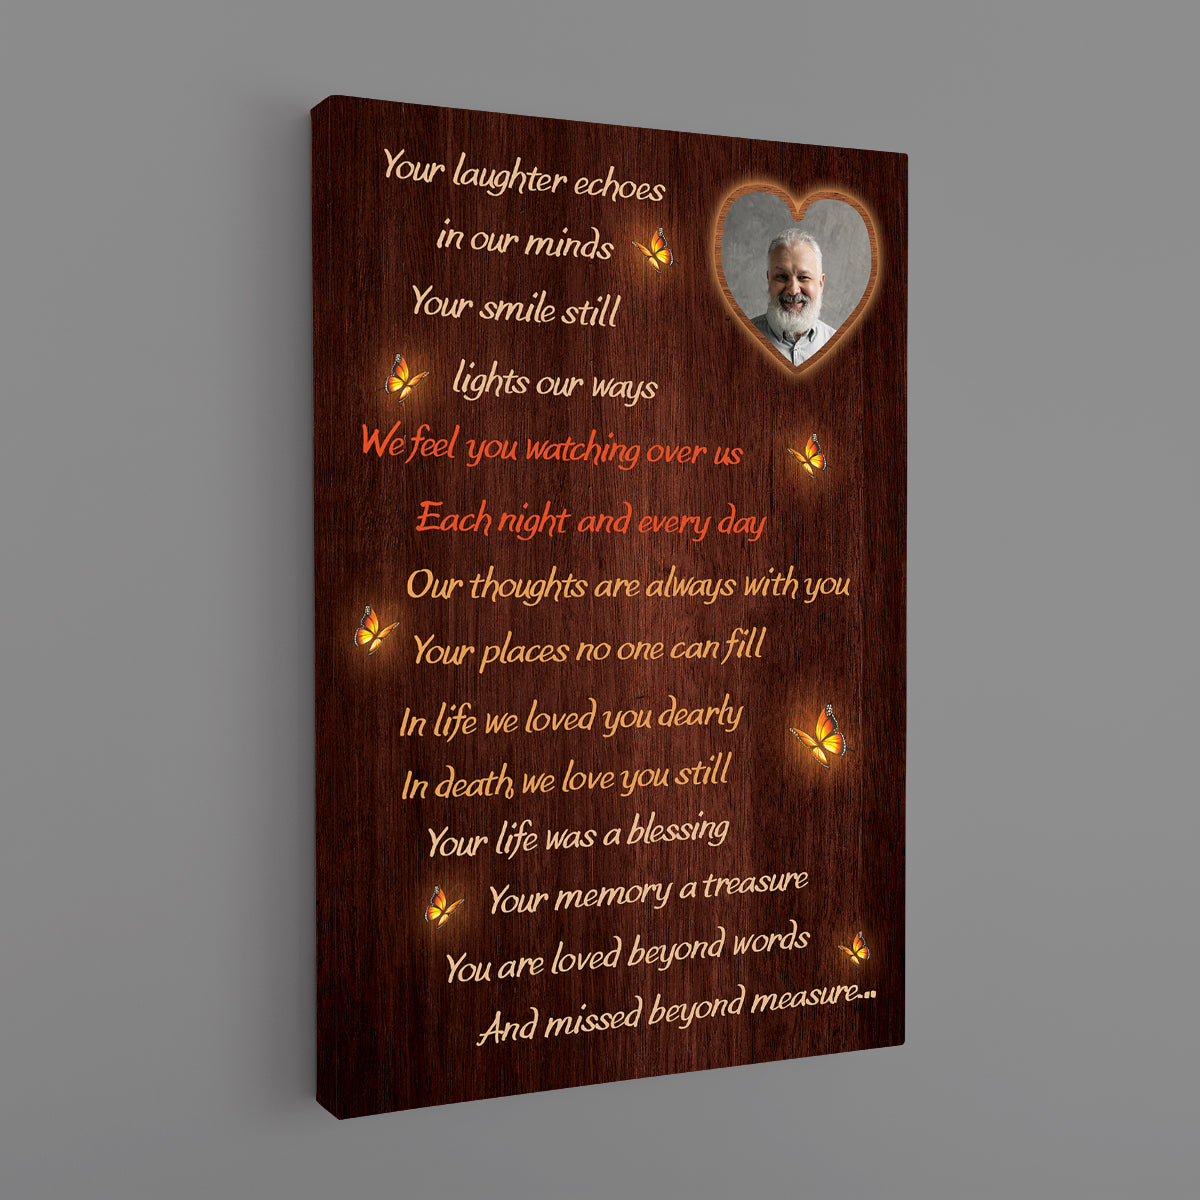 Father's Day Memorial Canvas - Your Laughter Echoes In Our Minds